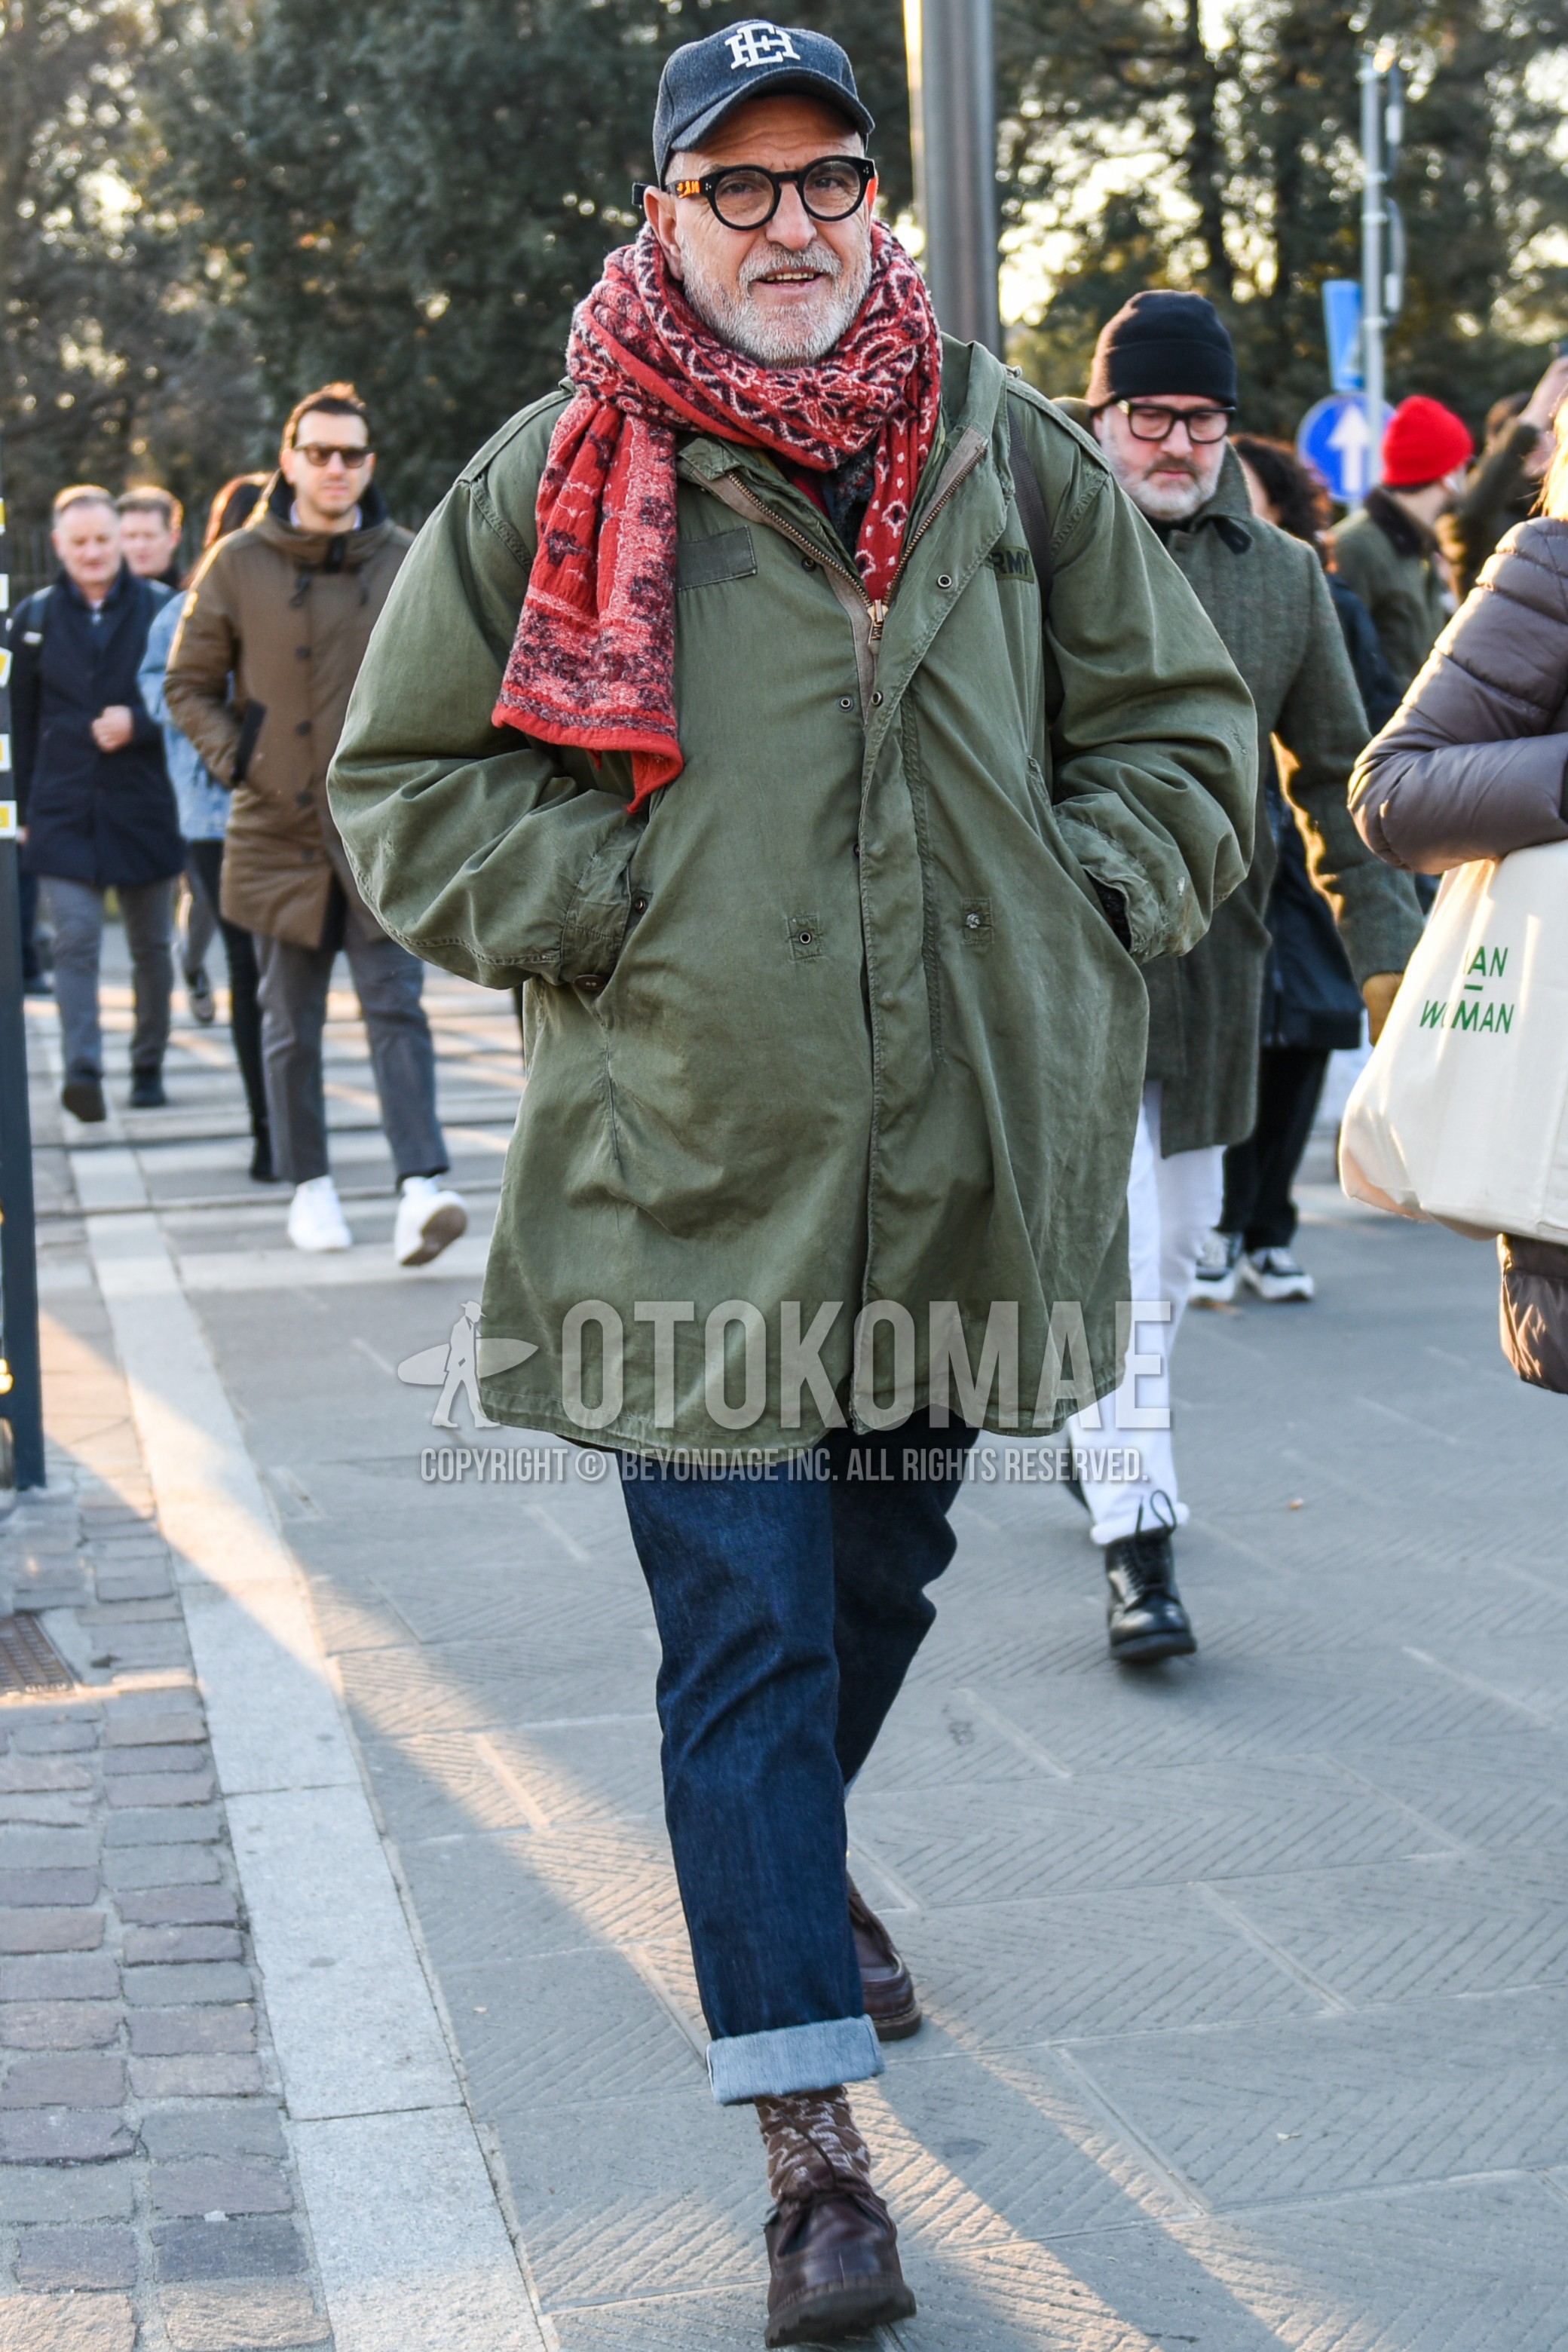 Men's autumn winter outfit with black one point baseball cap, black plain glasses, red scarf scarf, green plain field jacket/hunting jacket, blue plain denim/jeans, brown socks socks, brown  loafers leather shoes.